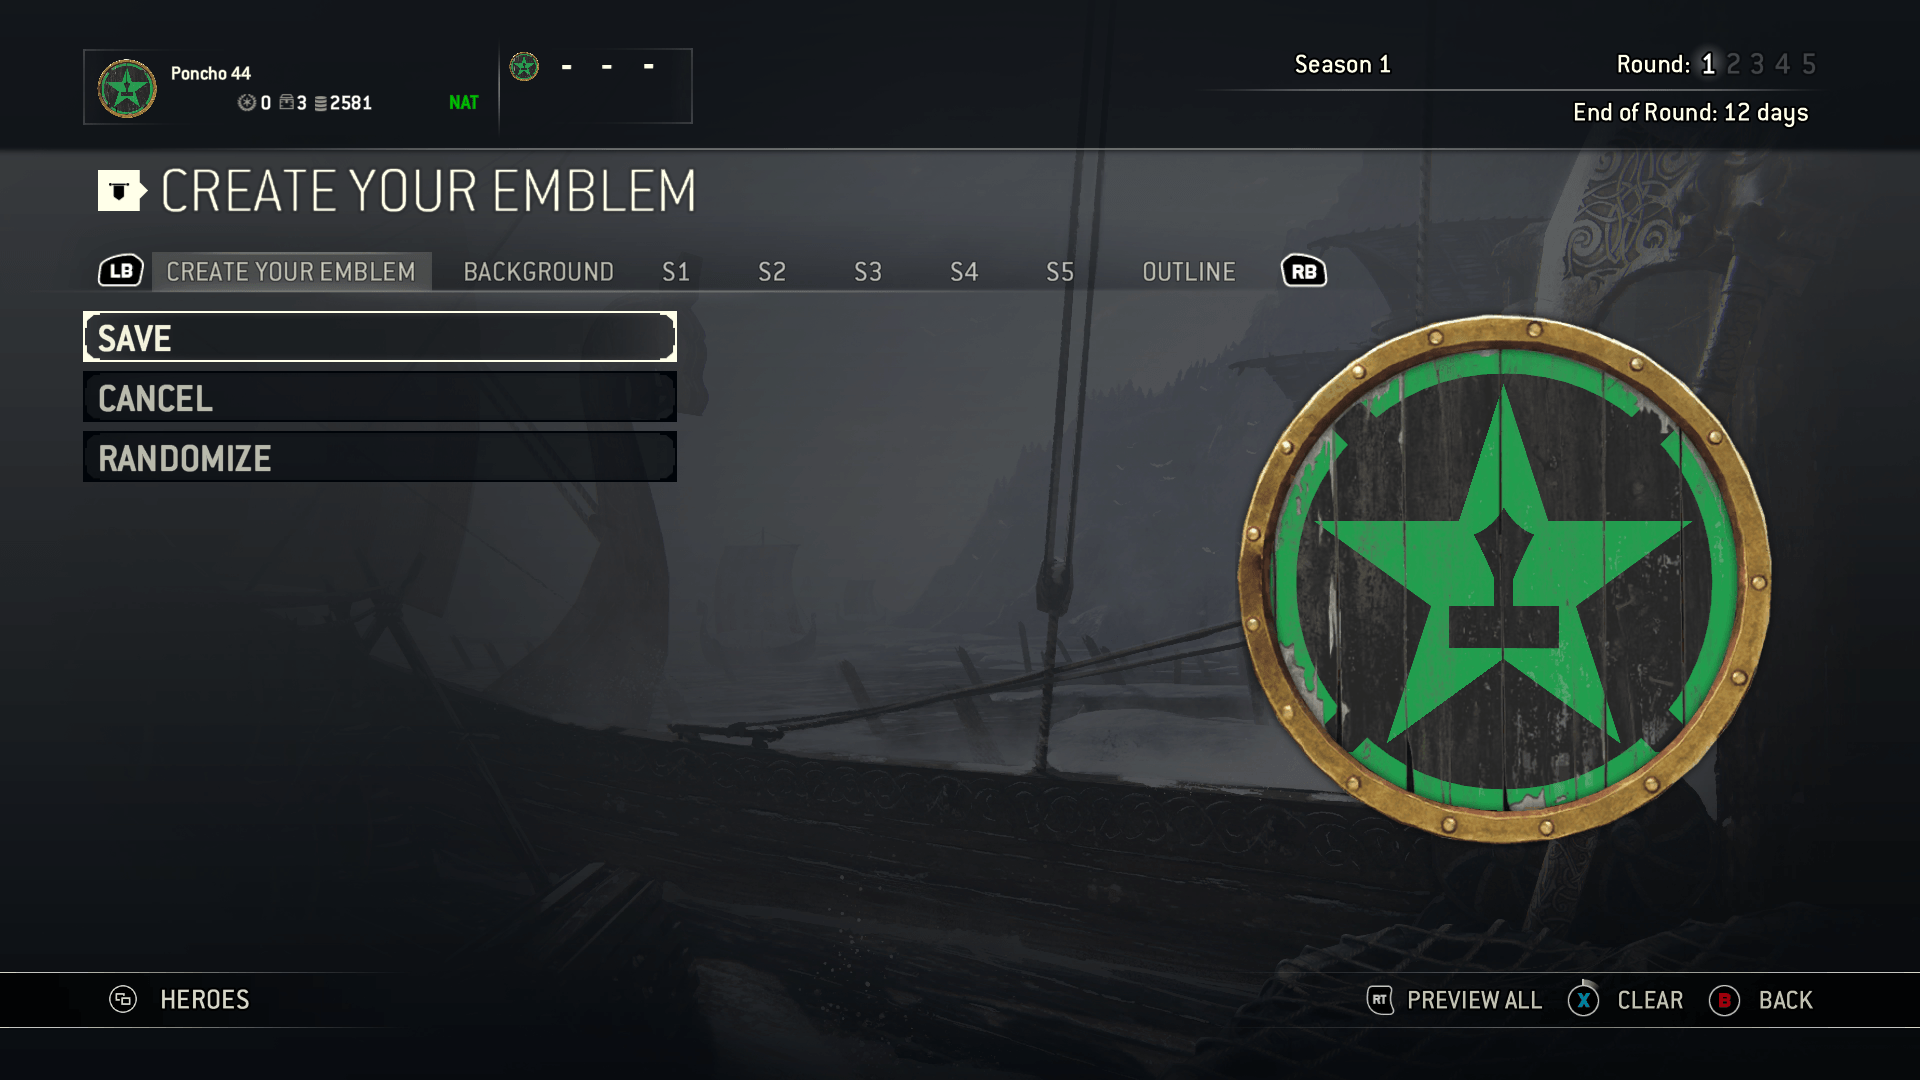 Achievement Hunter Logo - I made the Achievement Hunter logo in For Honor as my emblem. :D